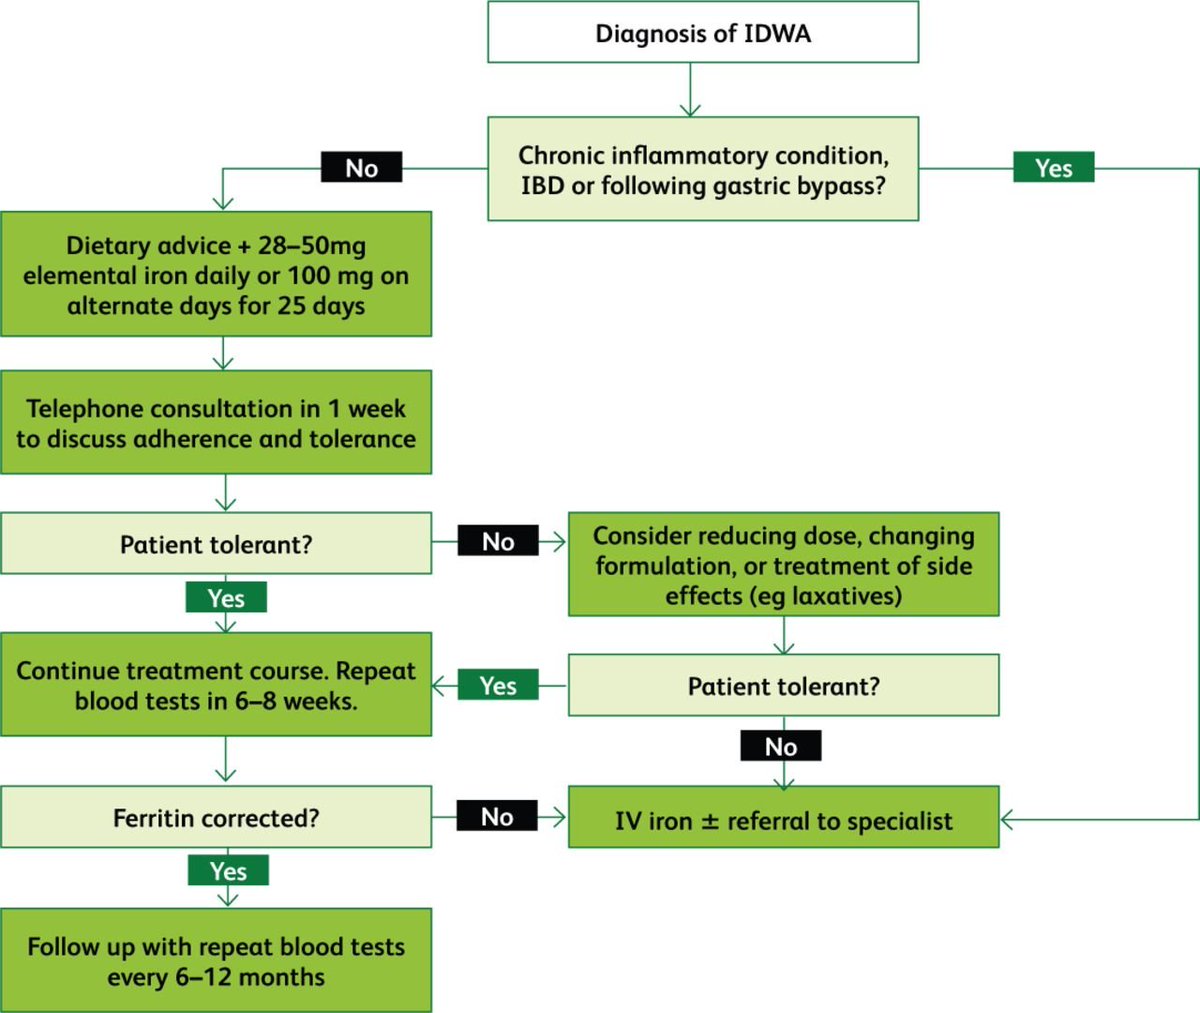 @Dr_BellaR Iron deficiency without anaemia: a diagnosis that matters rcpjournals.org/content/clinme…